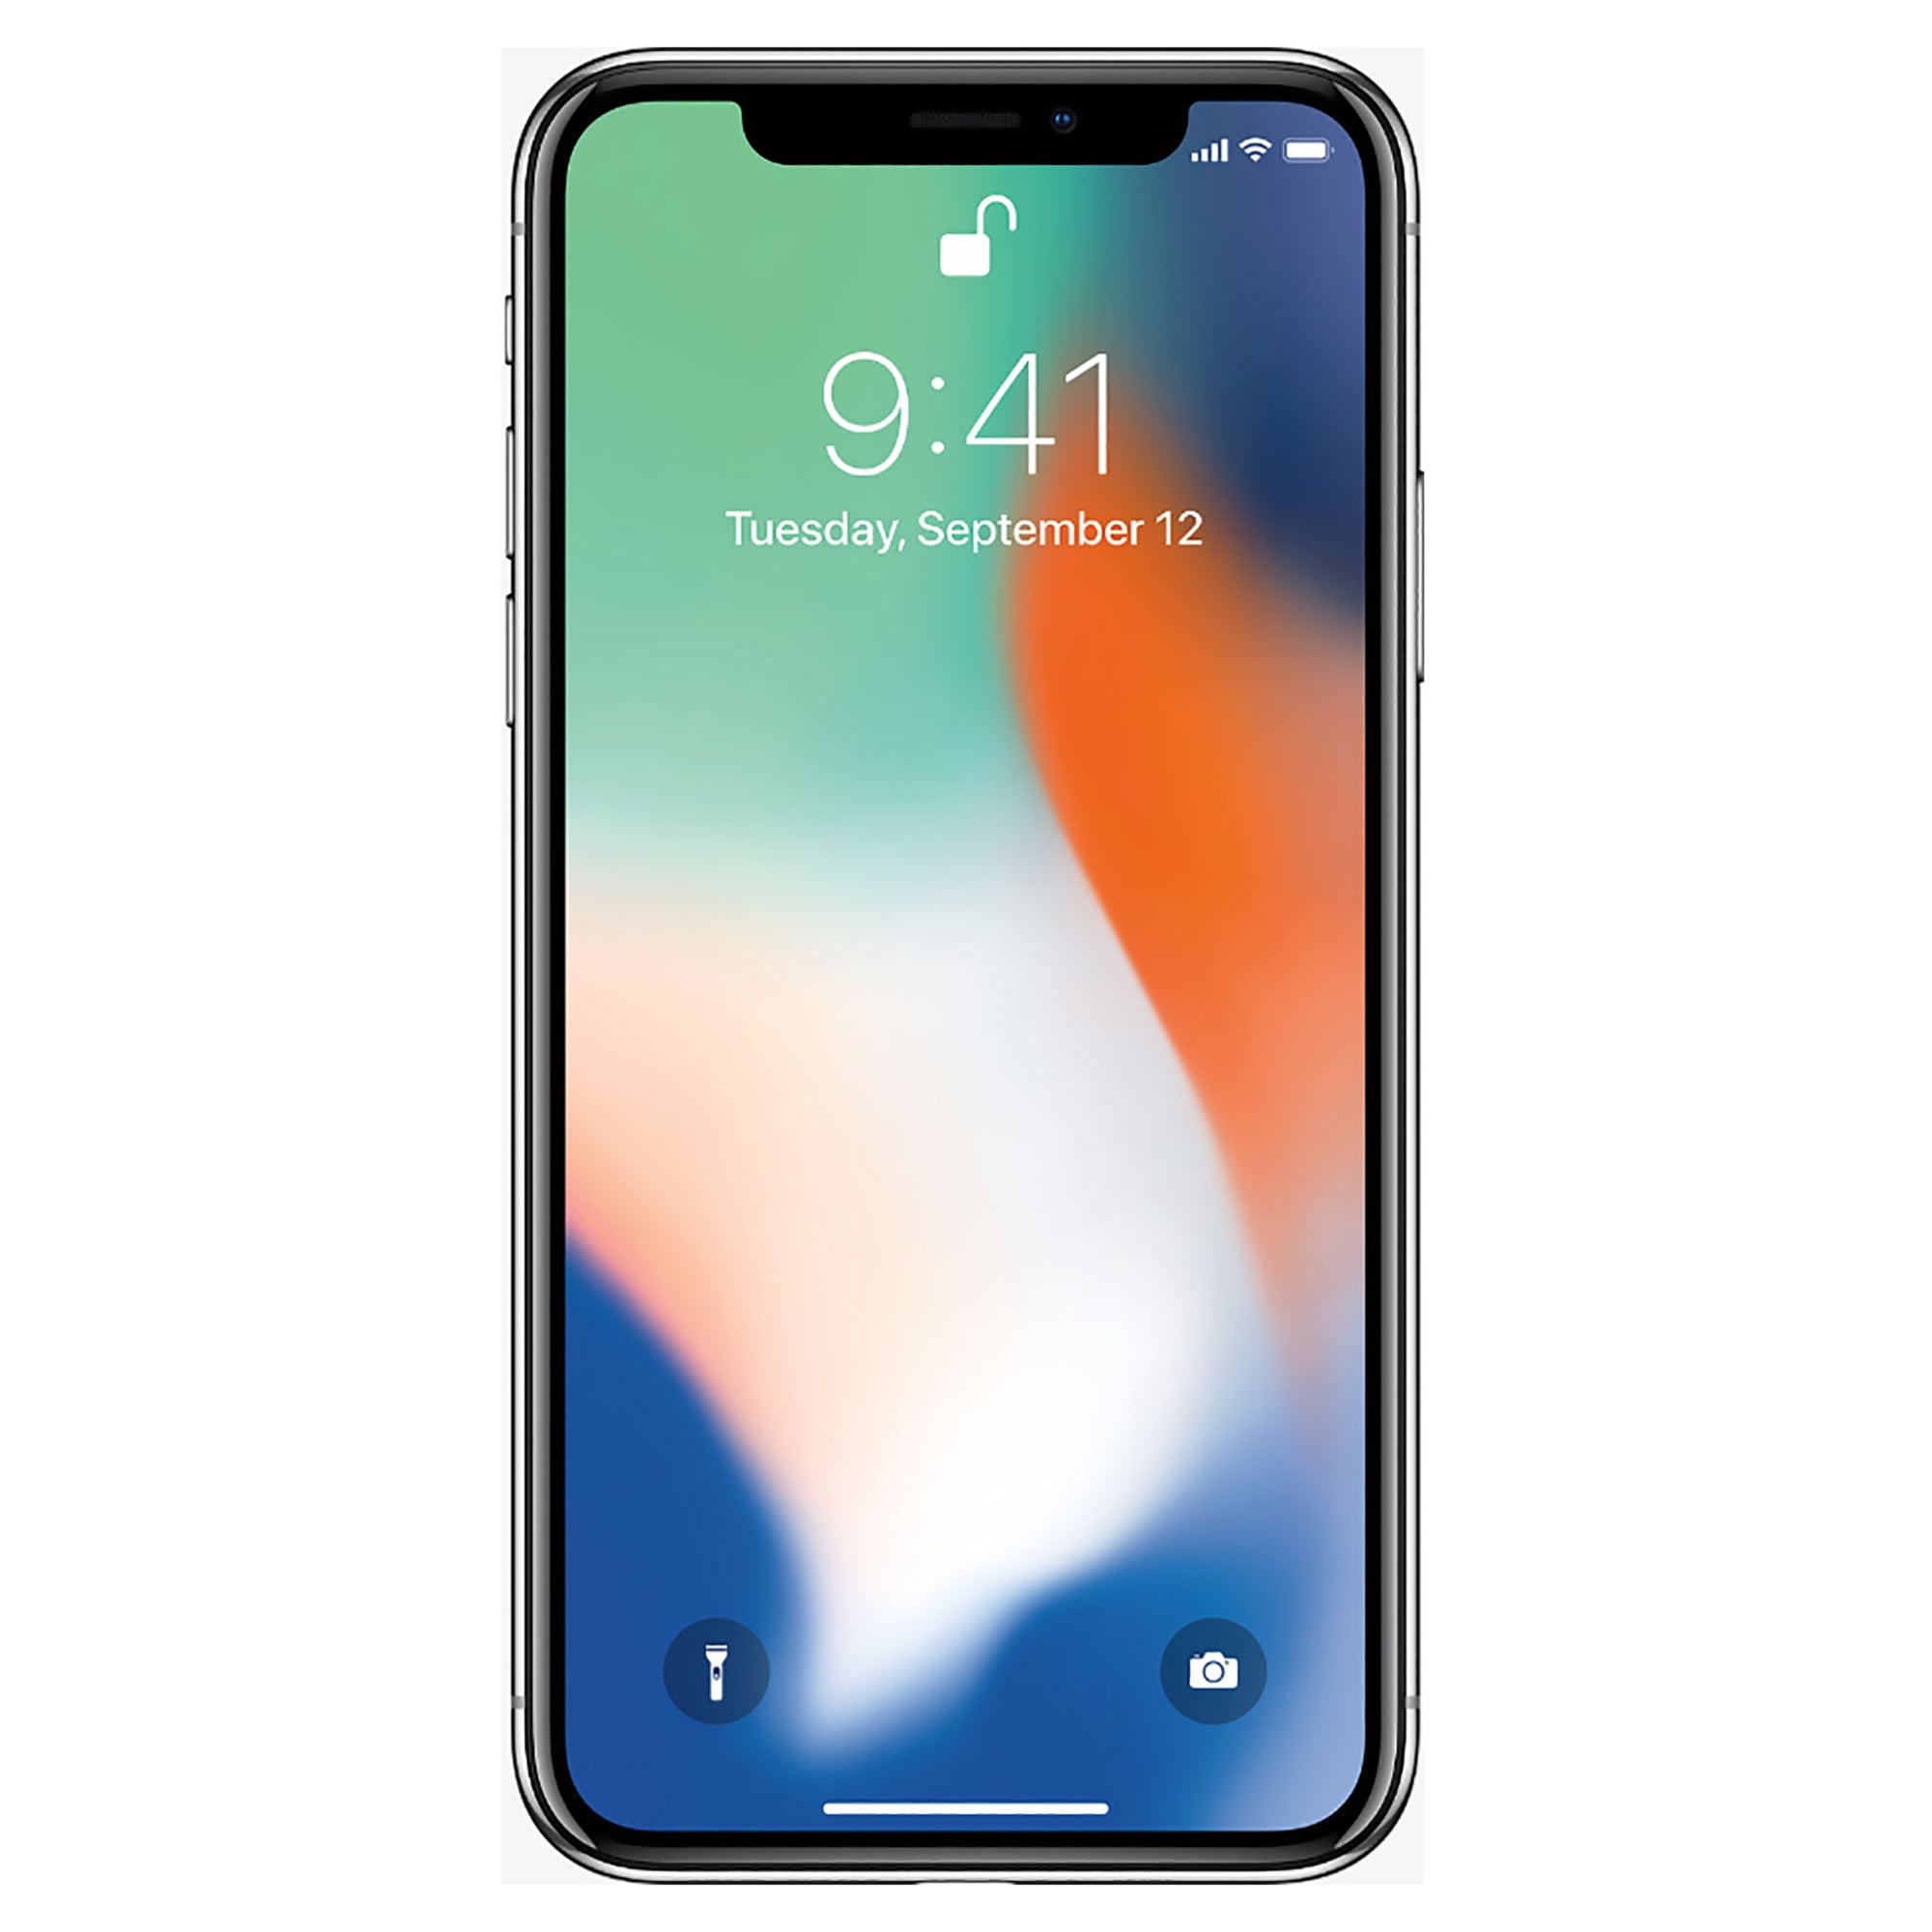 Pre-Owned Apple iPhone X 64GB Unlocked GSM Phone w/ Dual 12MP